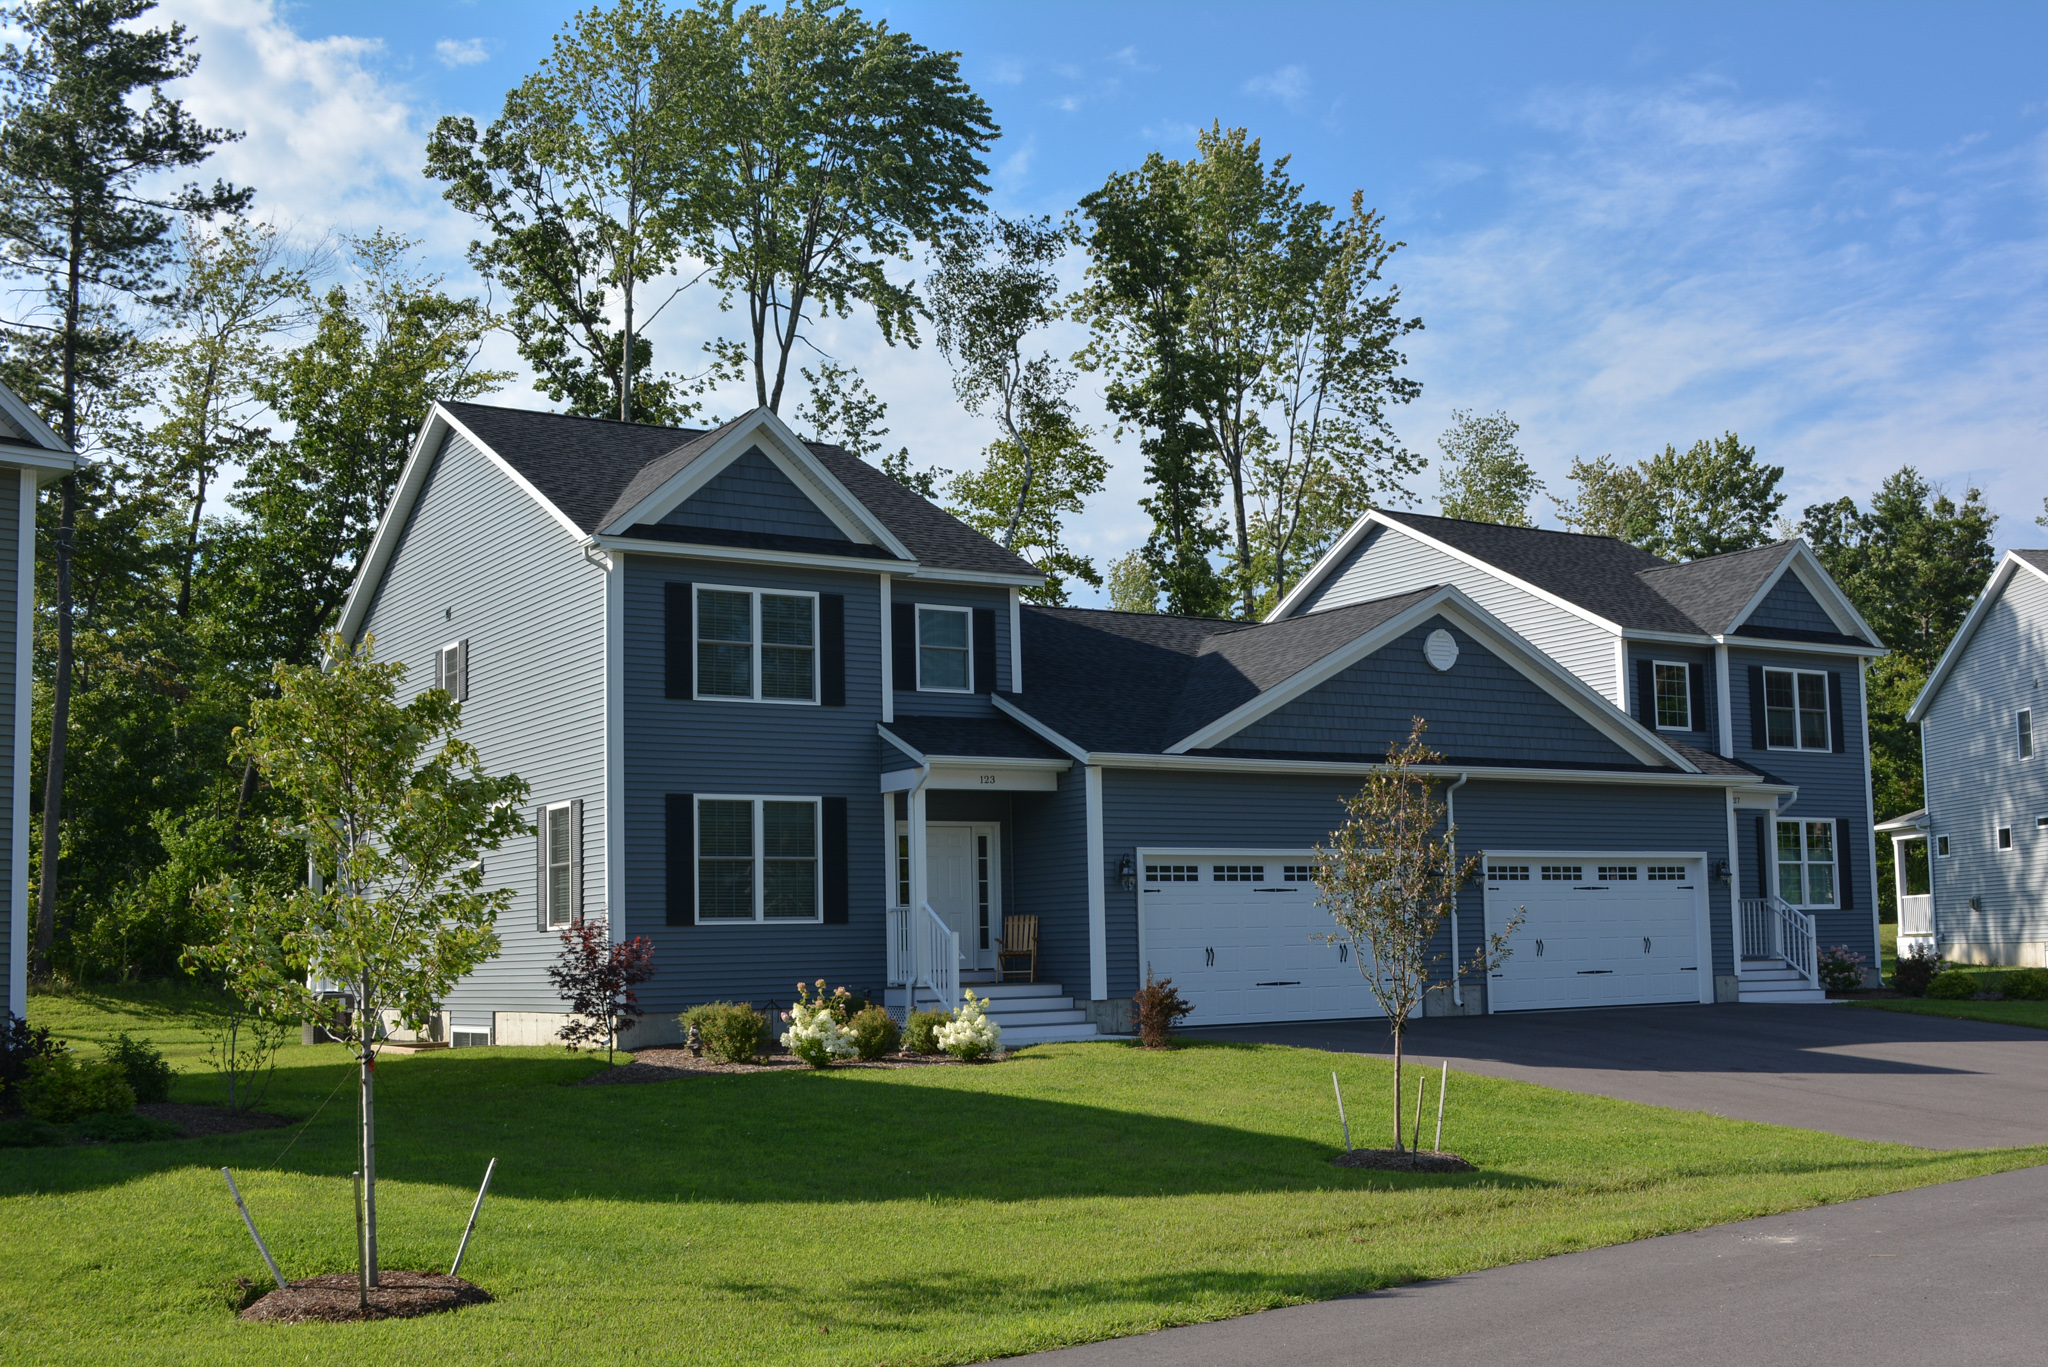 Single Family Homes, Townhouses, and Garden Villas at Brigante Woods